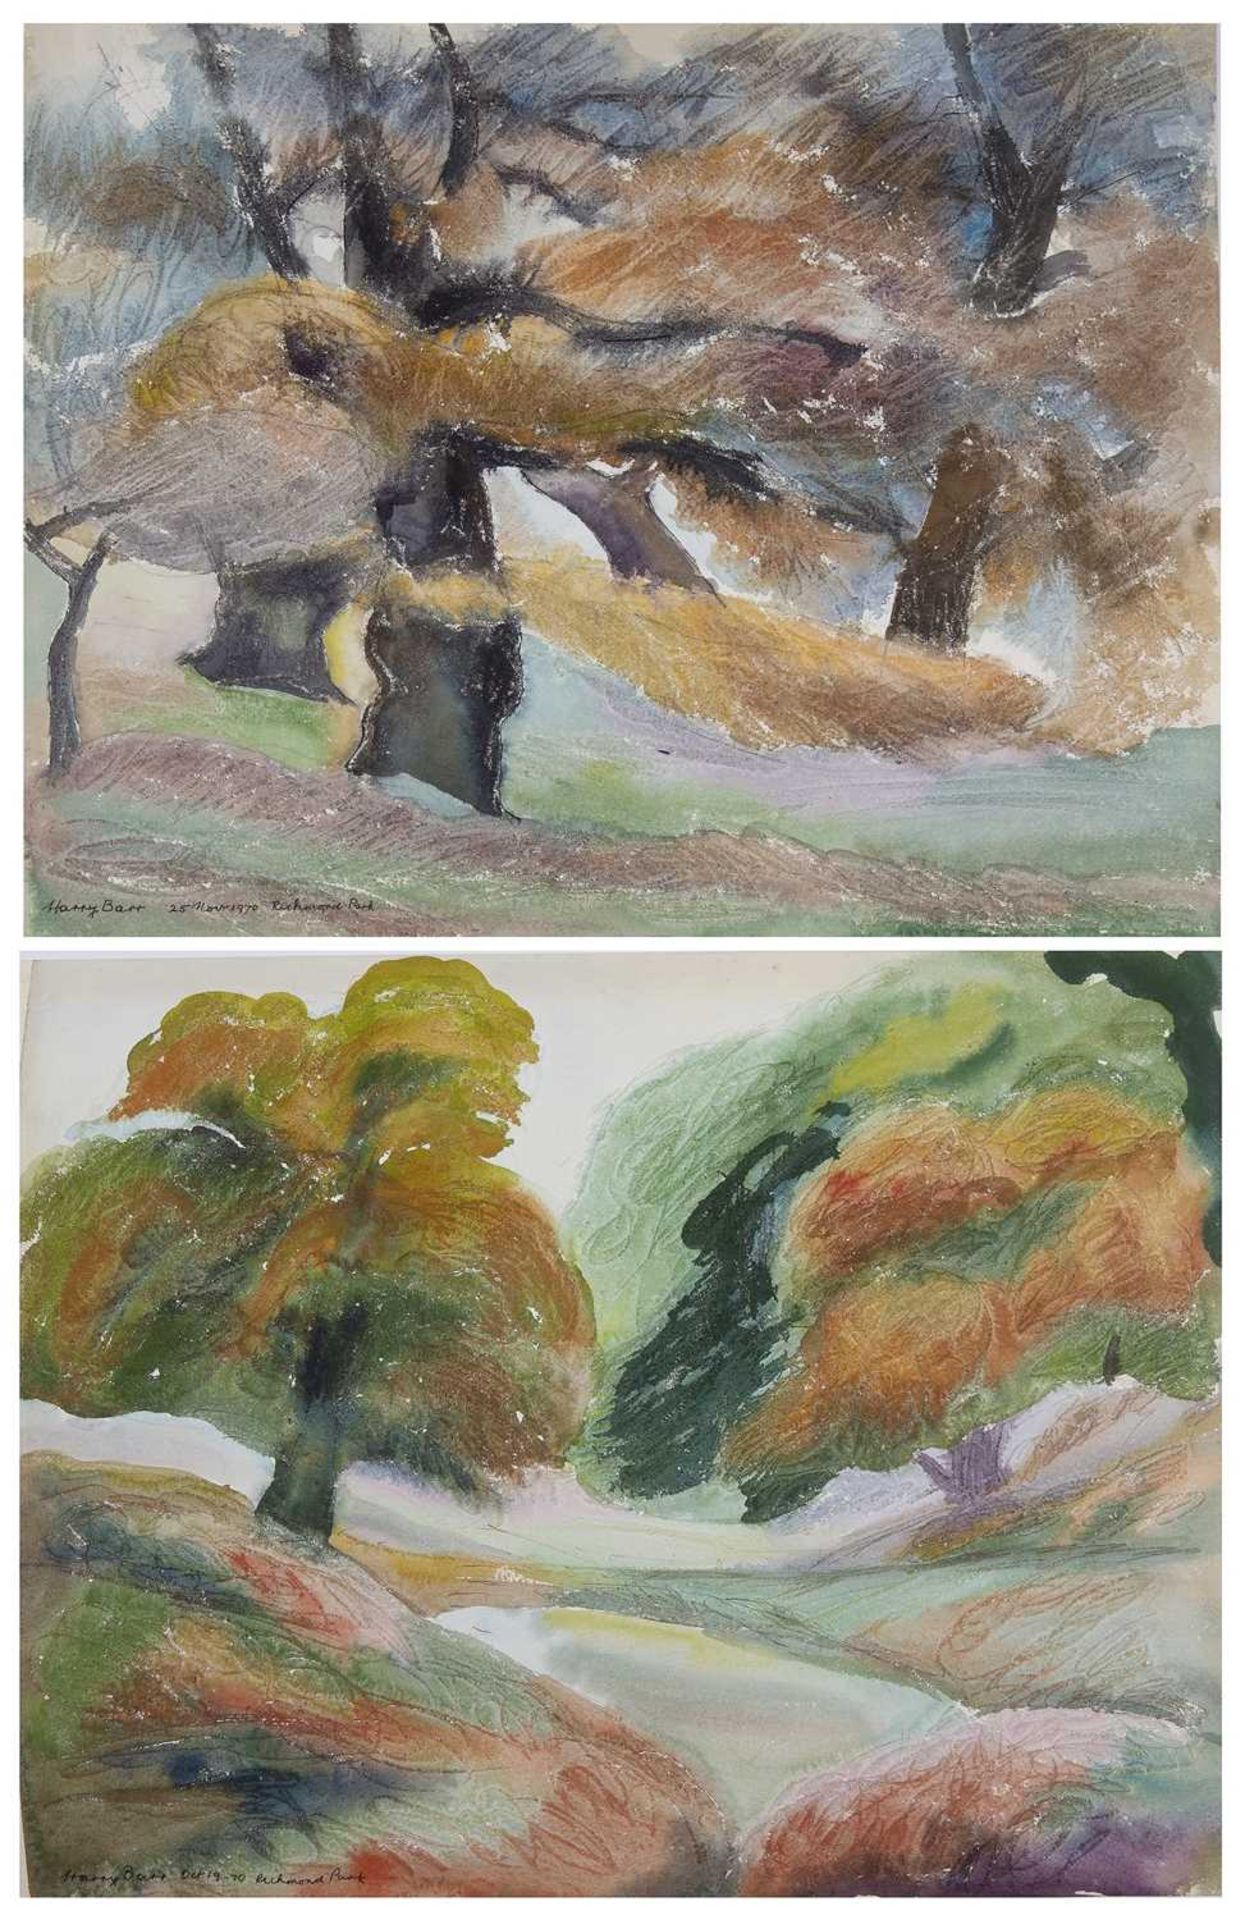 Harry Barr (1896-1987) ‘Richmond Park’, signed, inscribed and dated 25 Nov. 1970, pencil and - Bild 2 aus 2